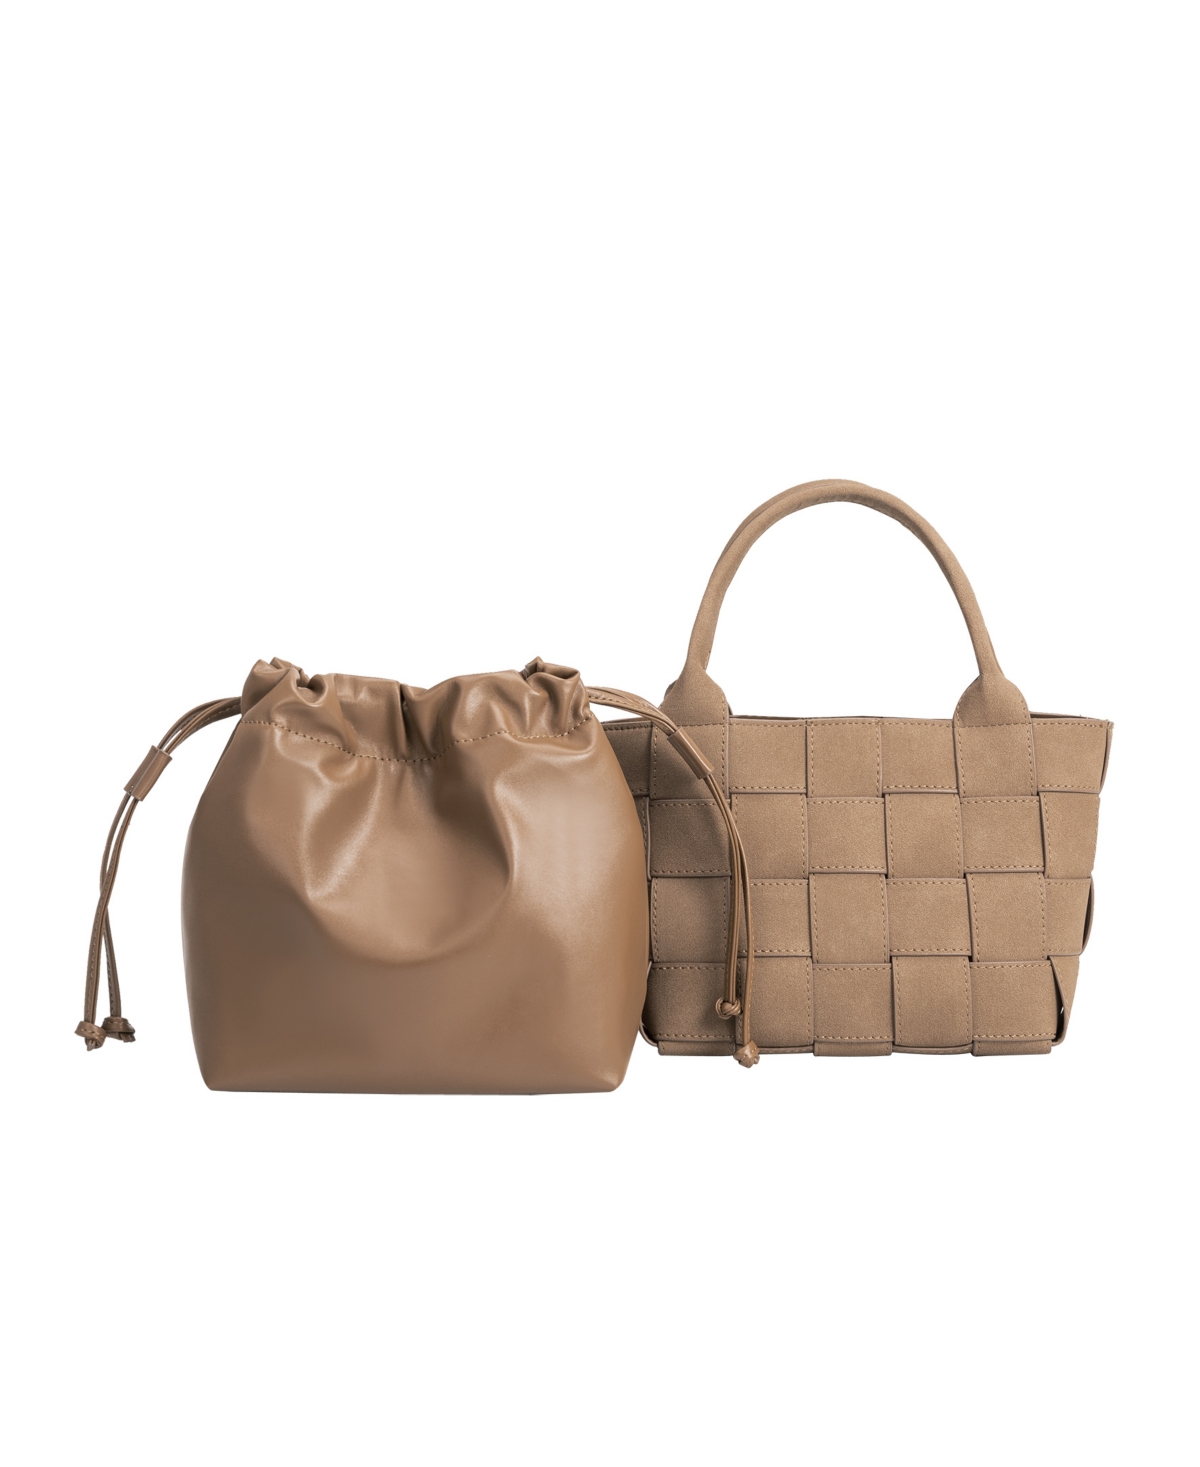 Melie Bianco Women's Lyndsey Tote Bag In Taupe